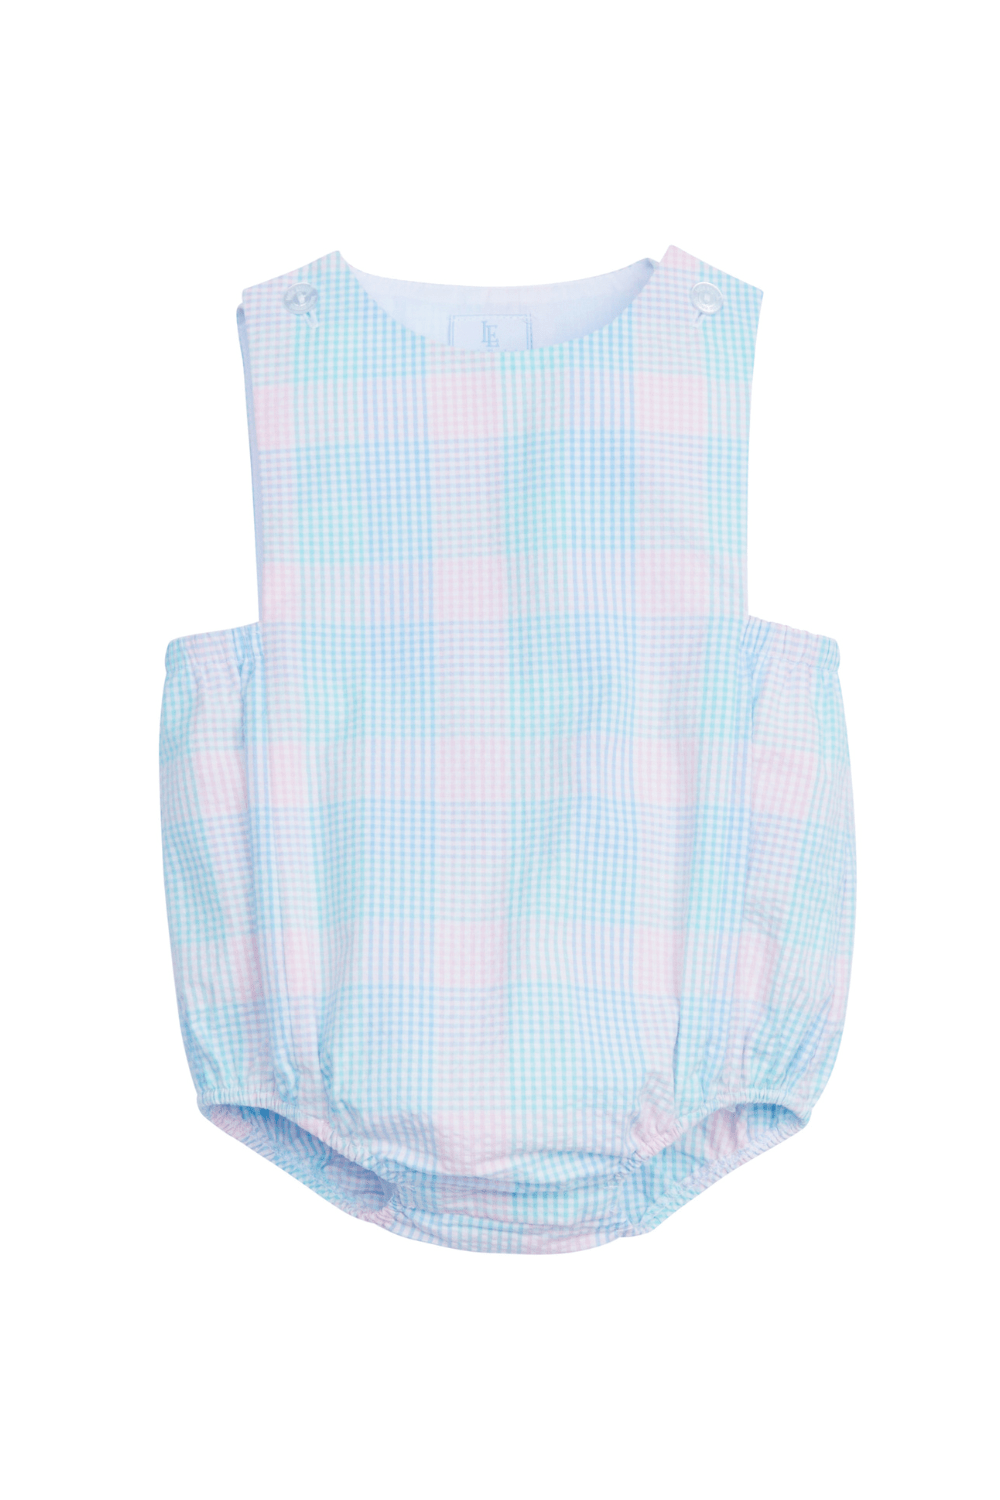 classic childrens clothing boys sunsuit in pink and blue plaid